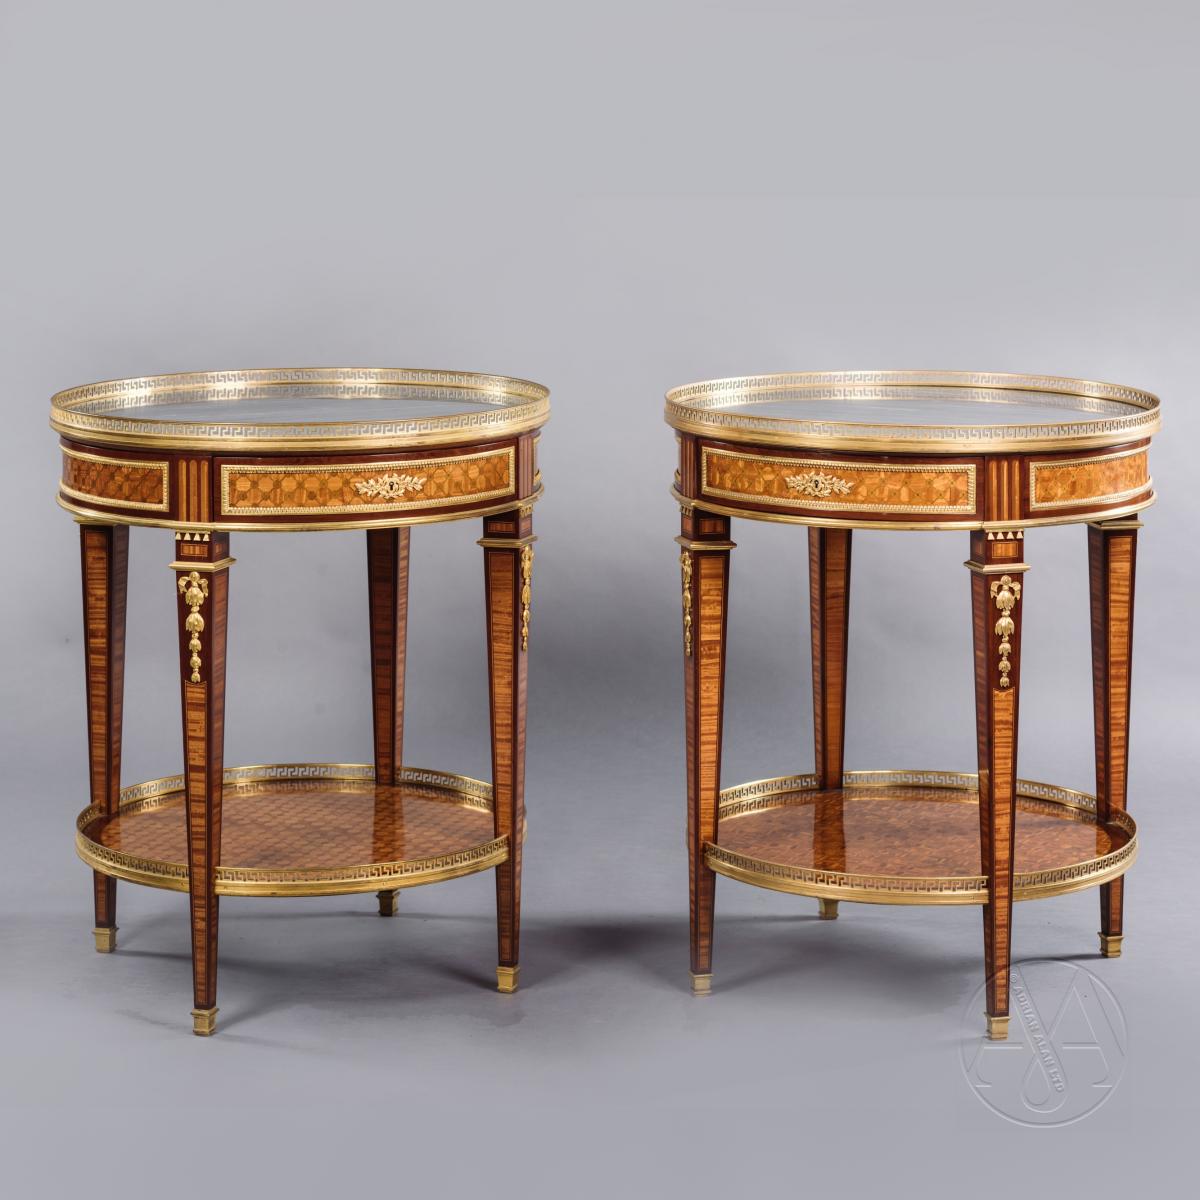 A Rare Pair of Louis XVI Style Gilt-Bronze Mounted Parquetry Gueridons.  French, Circa 1880.